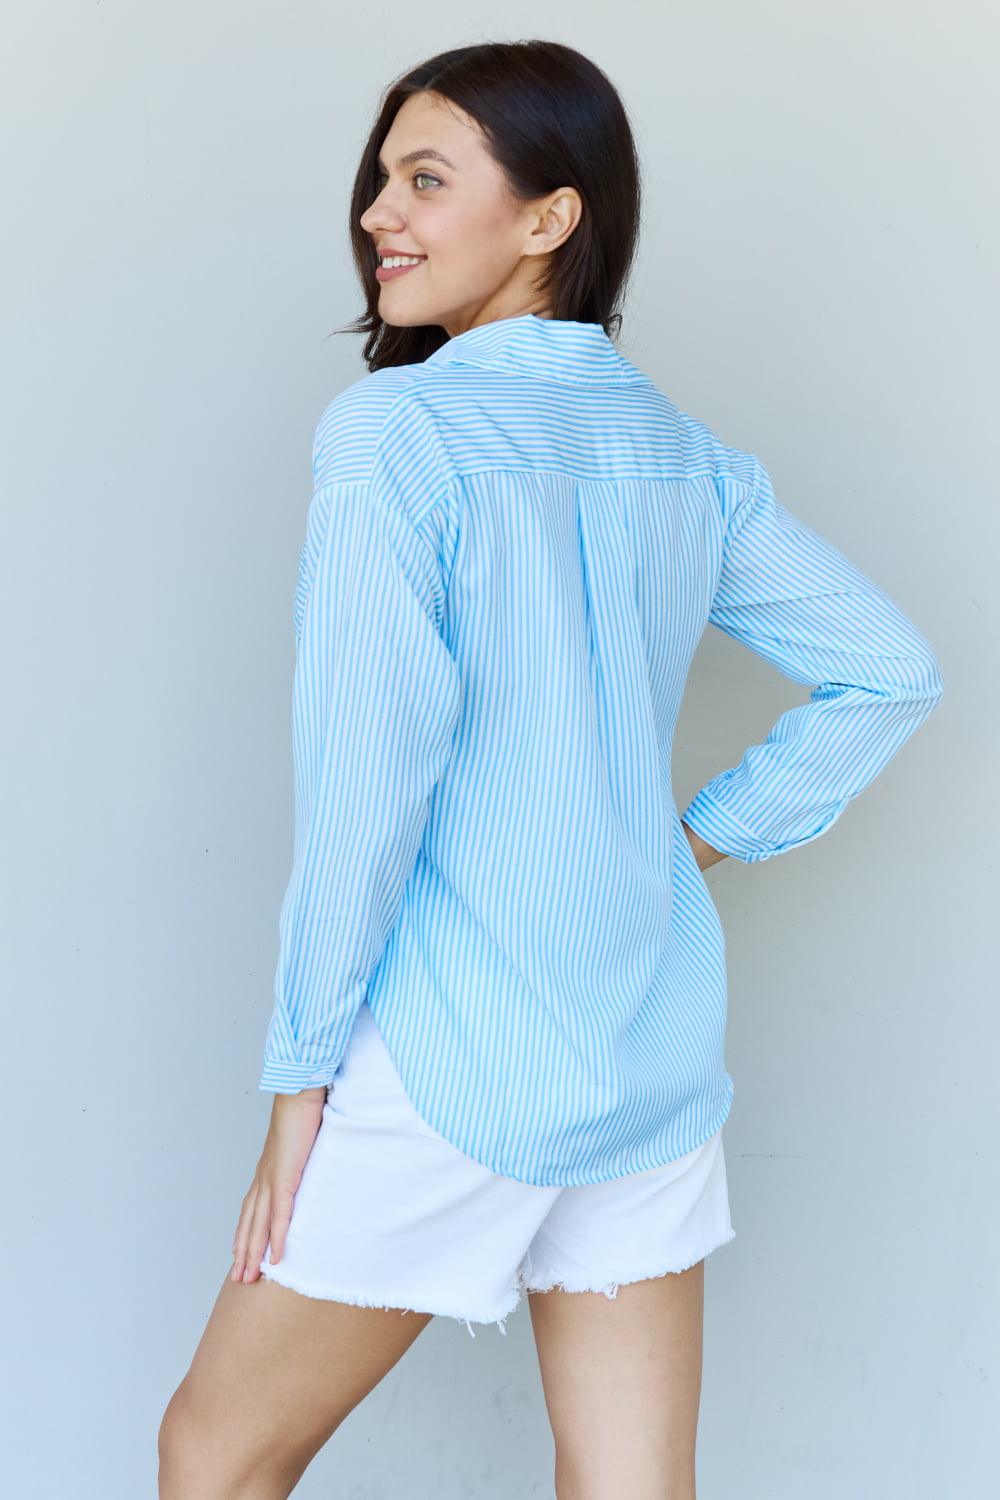 Doublju She Means Business Striped Button Down Shirt Top - Immenzive